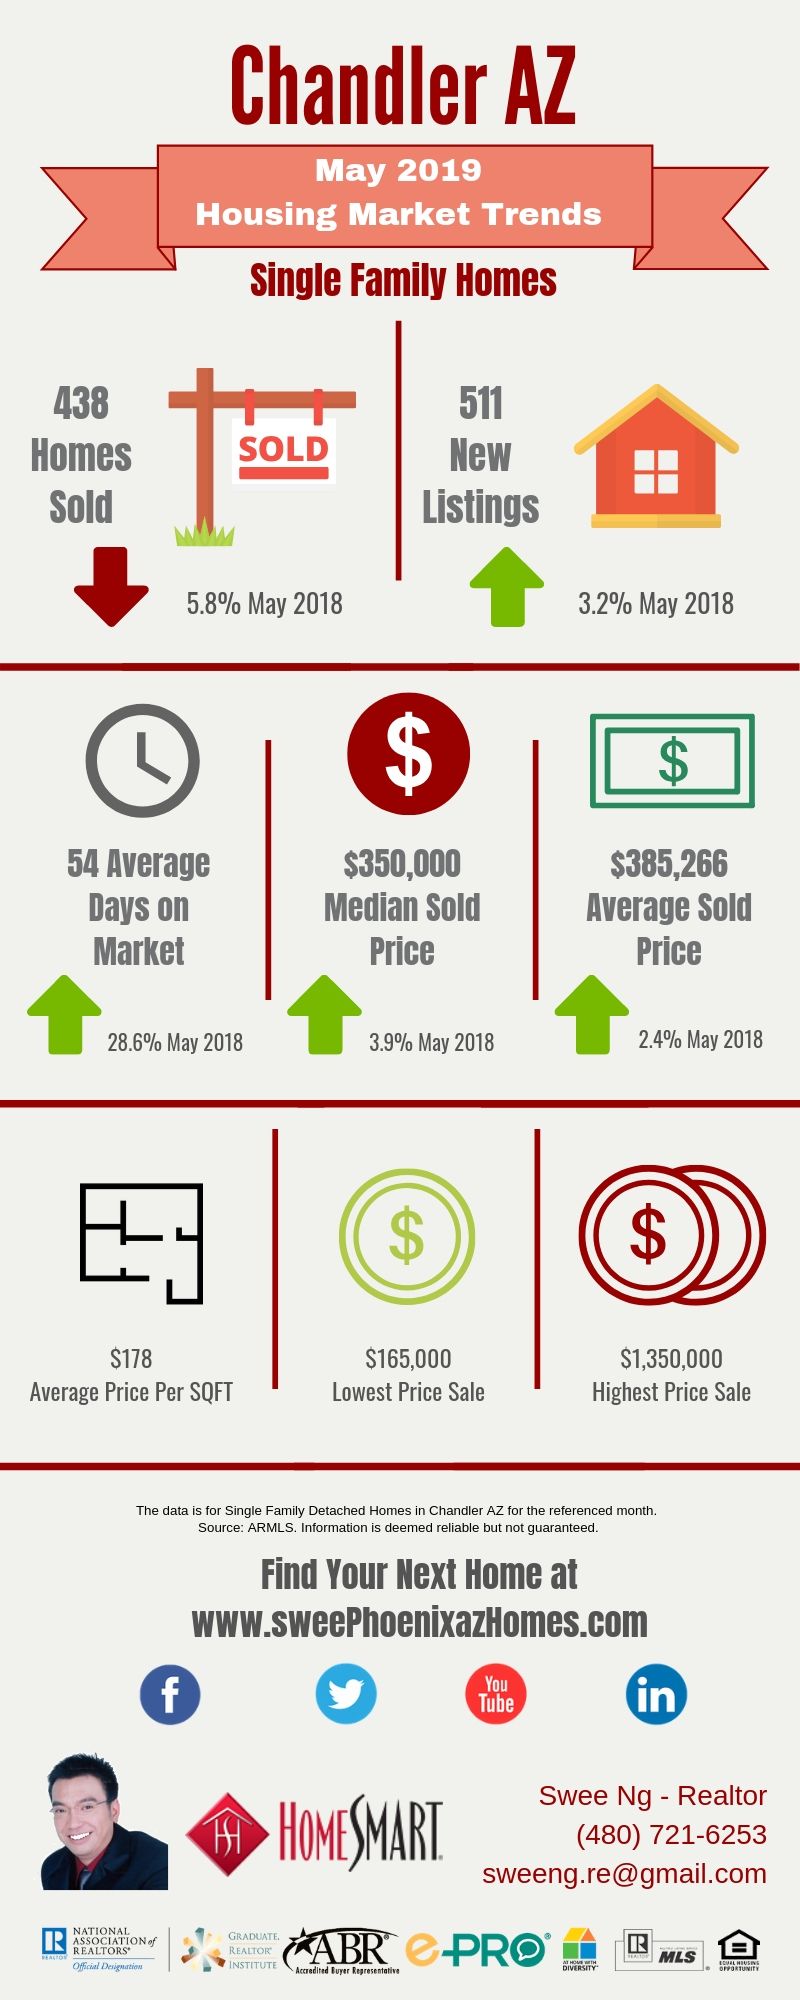 Chandler AZ Housing Market Update May 2019 by Swee Ng, House Value and Real Estate Listings